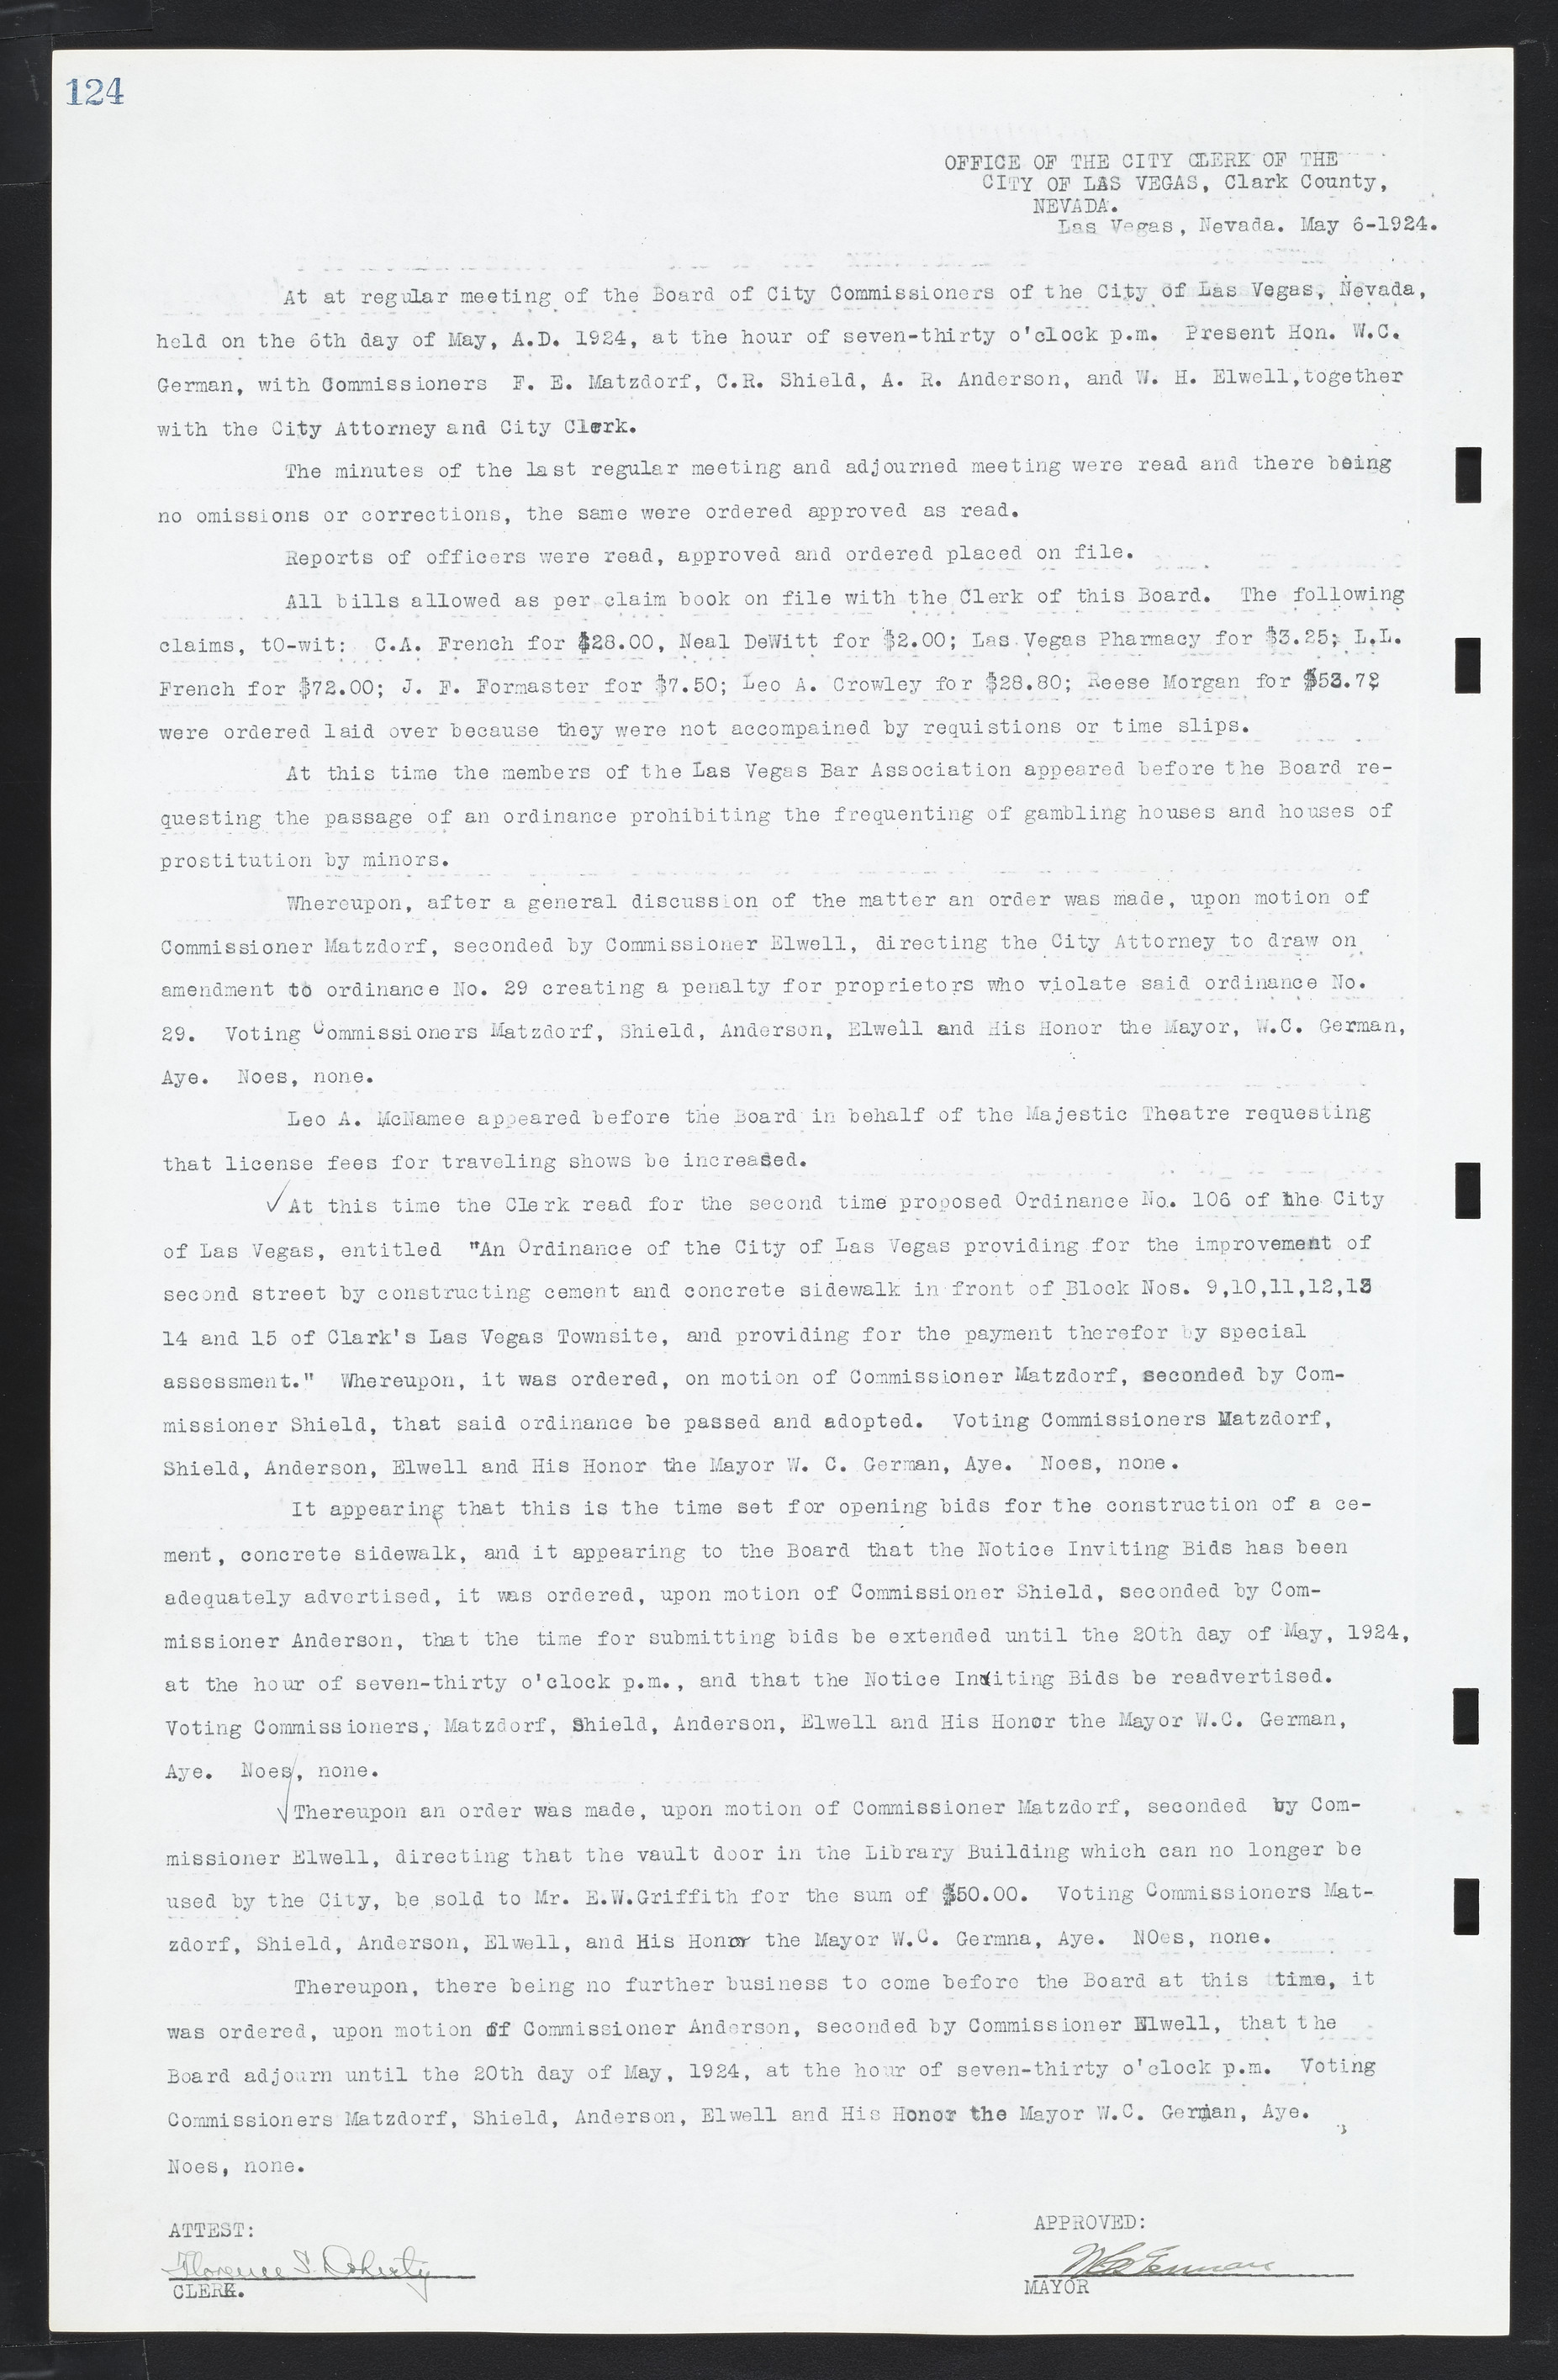 Las Vegas City Commission Minutes, March 1, 1922 to May 10, 1929, lvc000002-131